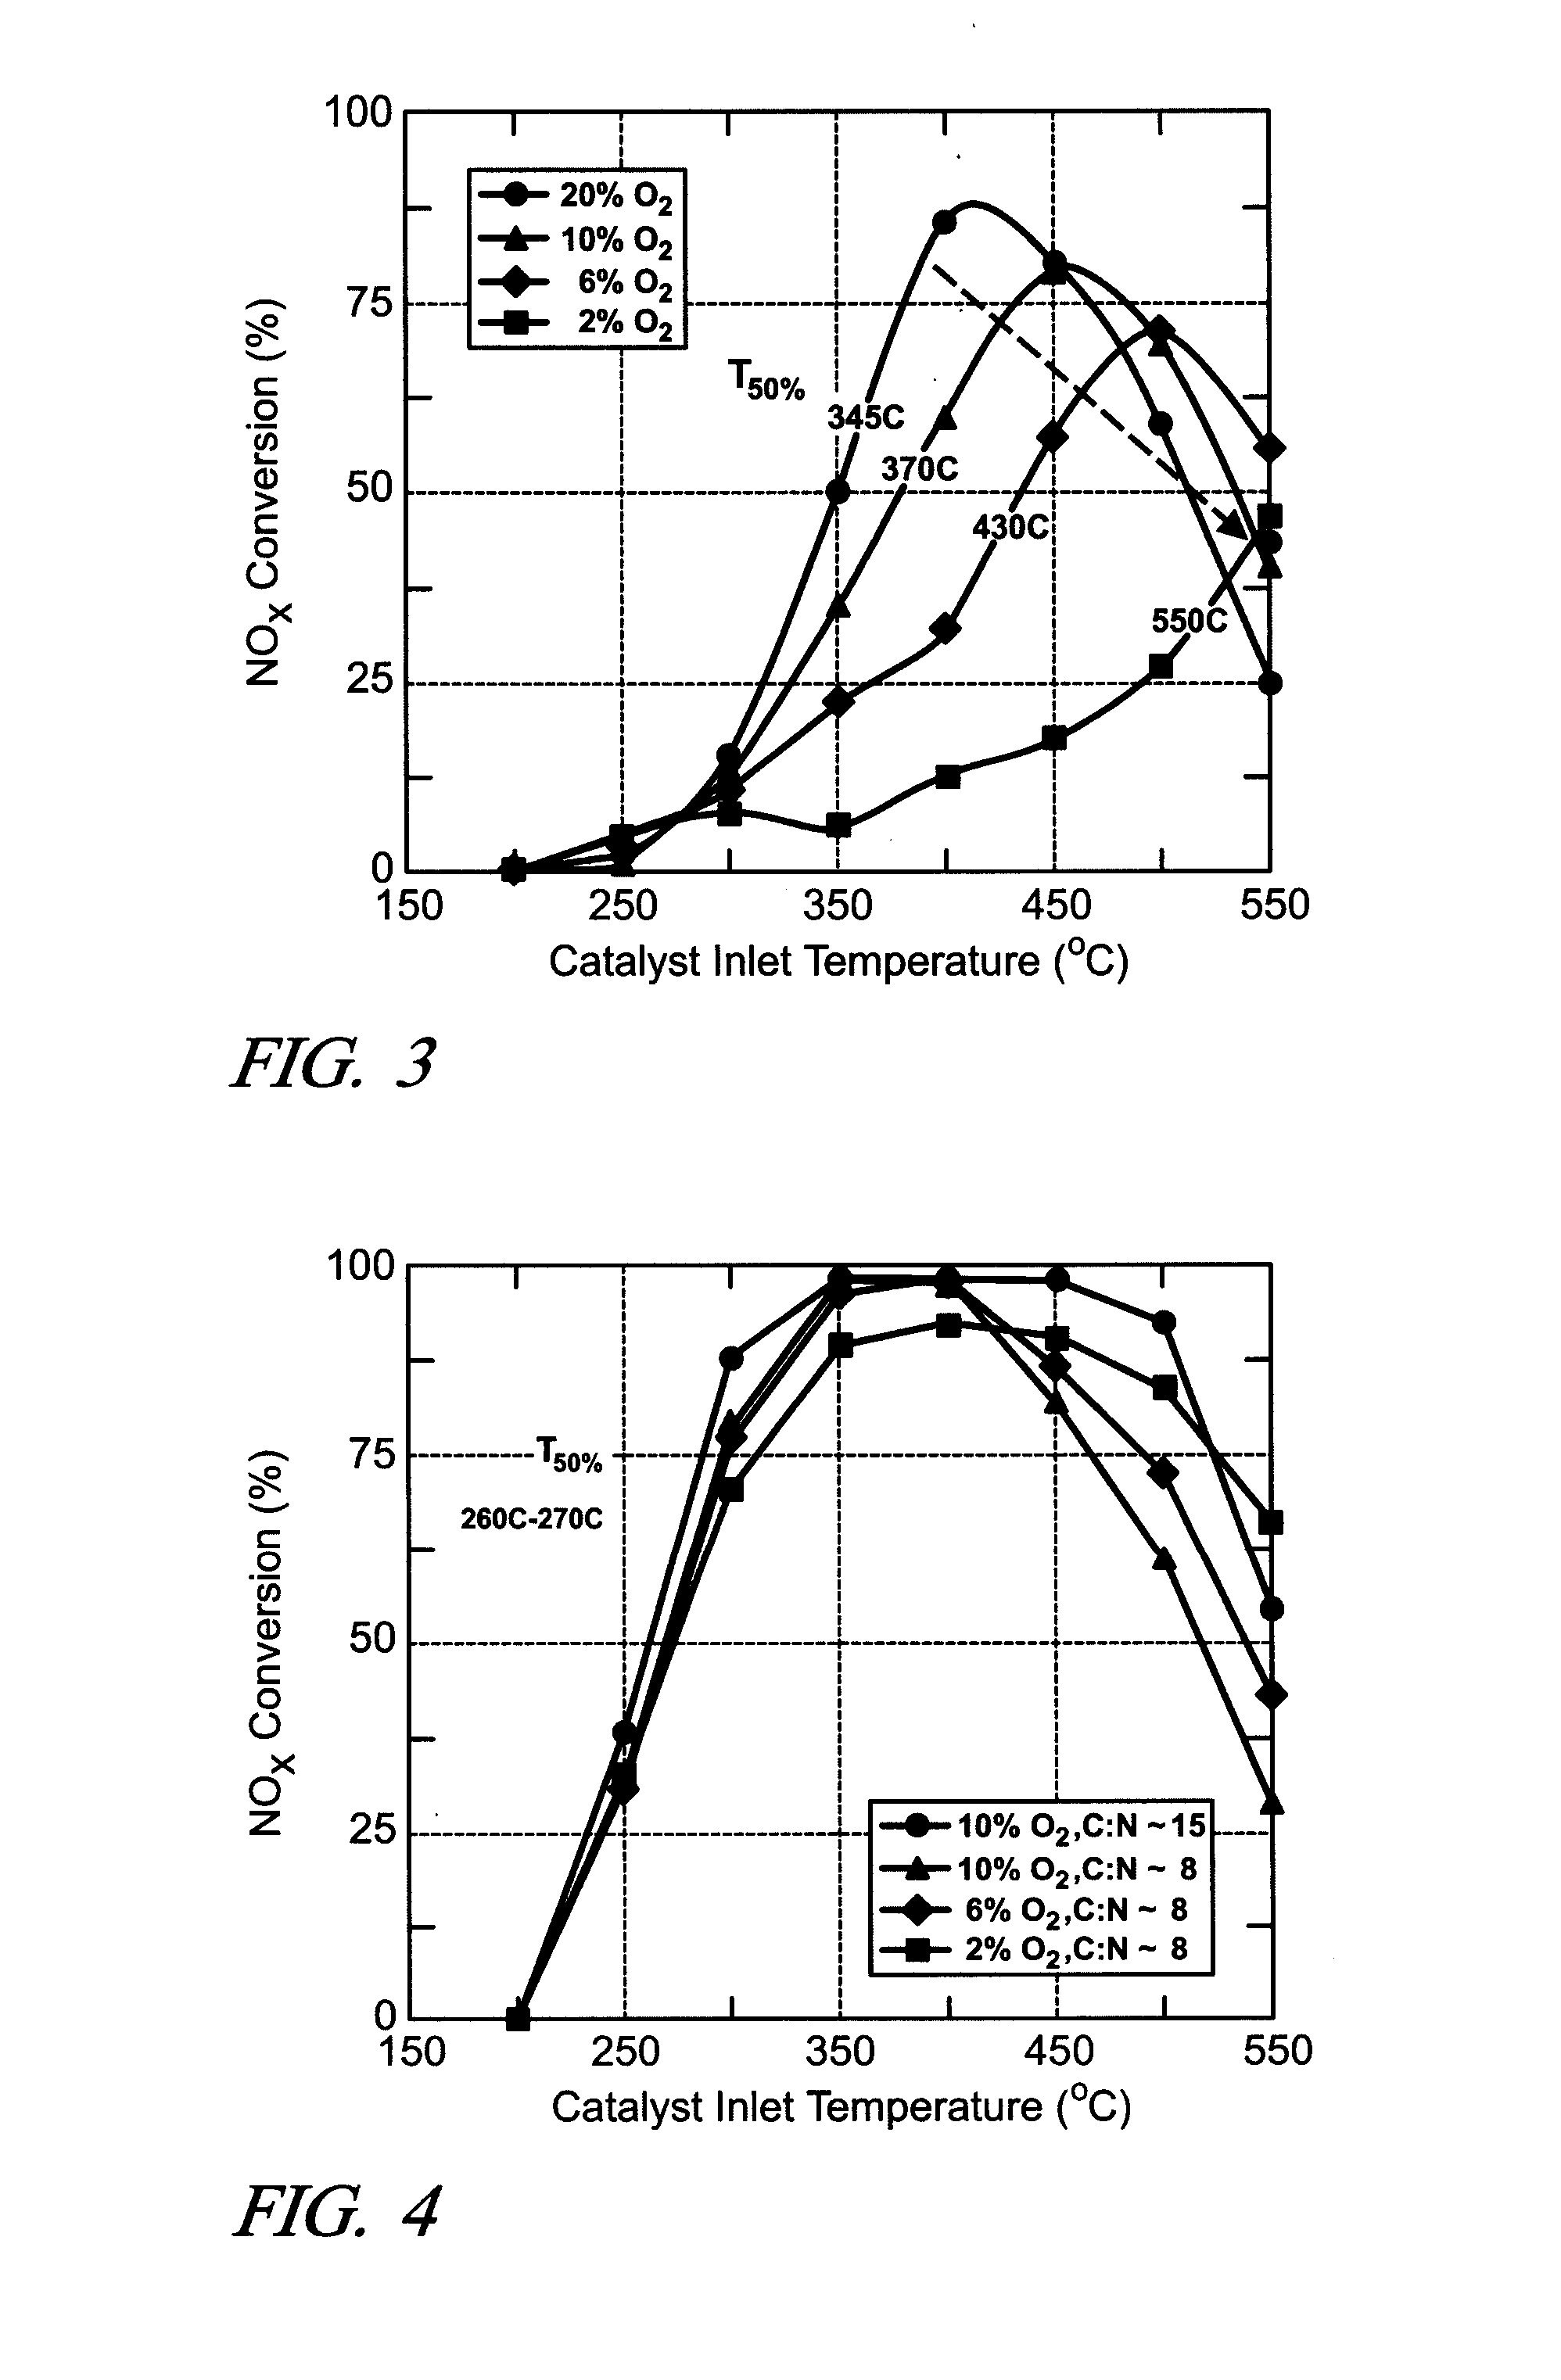 Method and Apparatus to Selectively Reduce NOx in an Exhaust Gas Feedstream